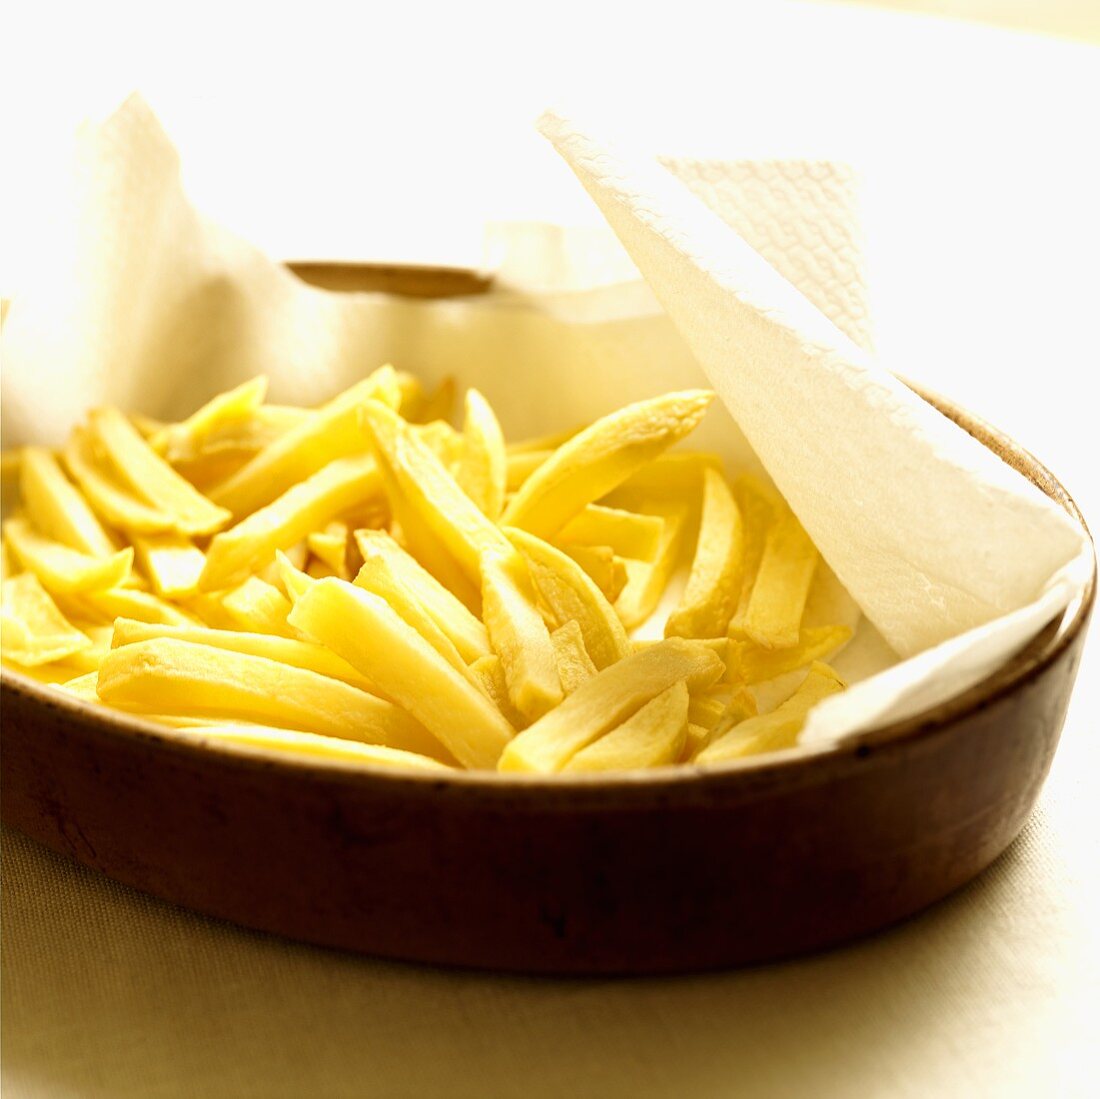 Home-made chips on kitchen paper